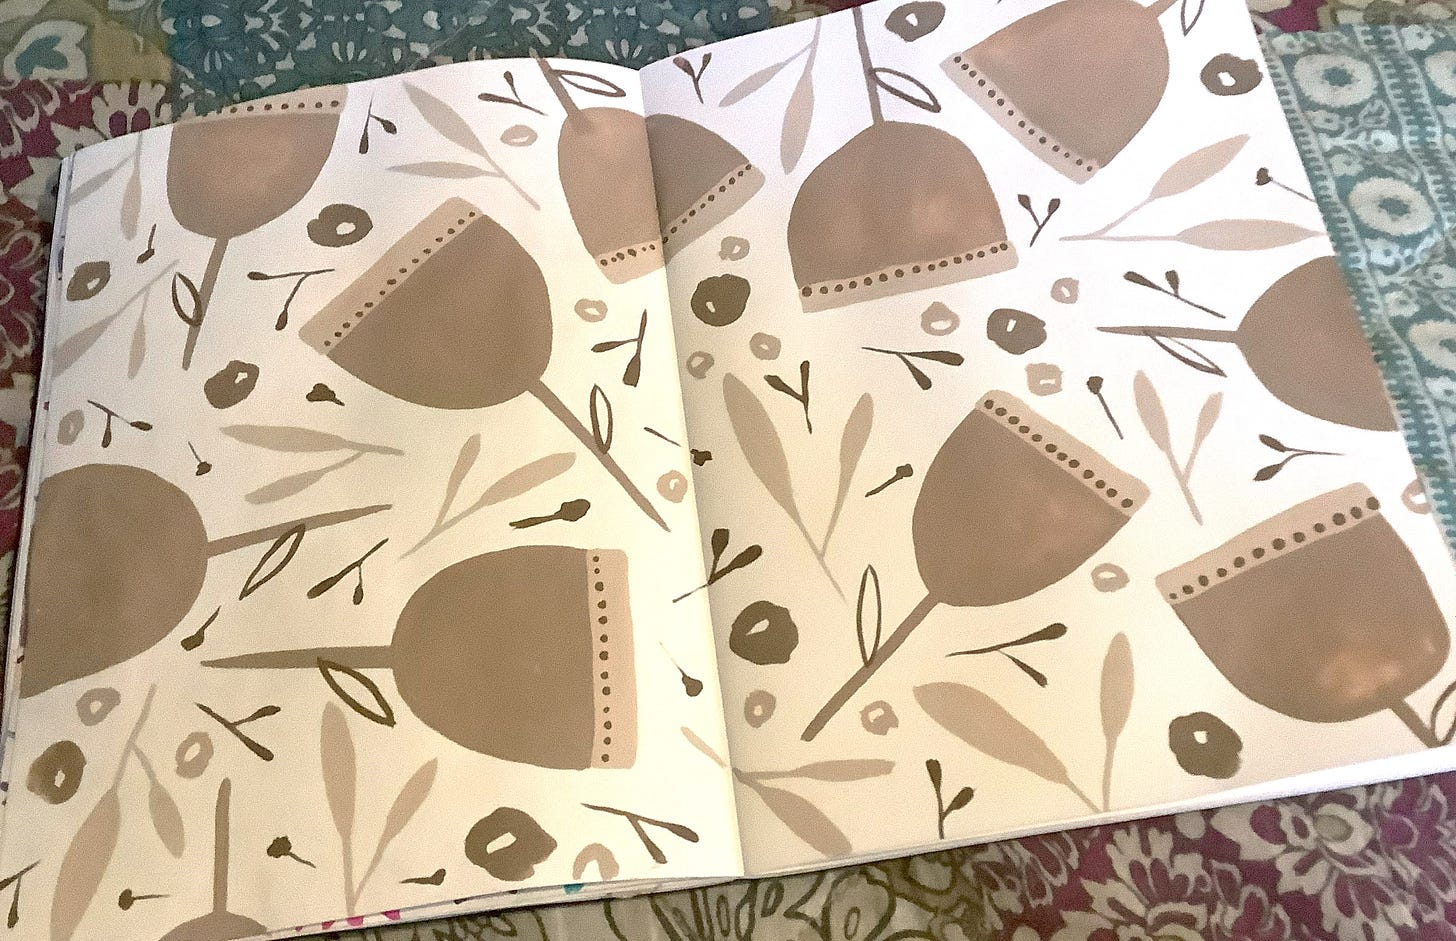 sketchbook spread showing painted floral pattern in beige and cream colours - painted by Tasha Goddard